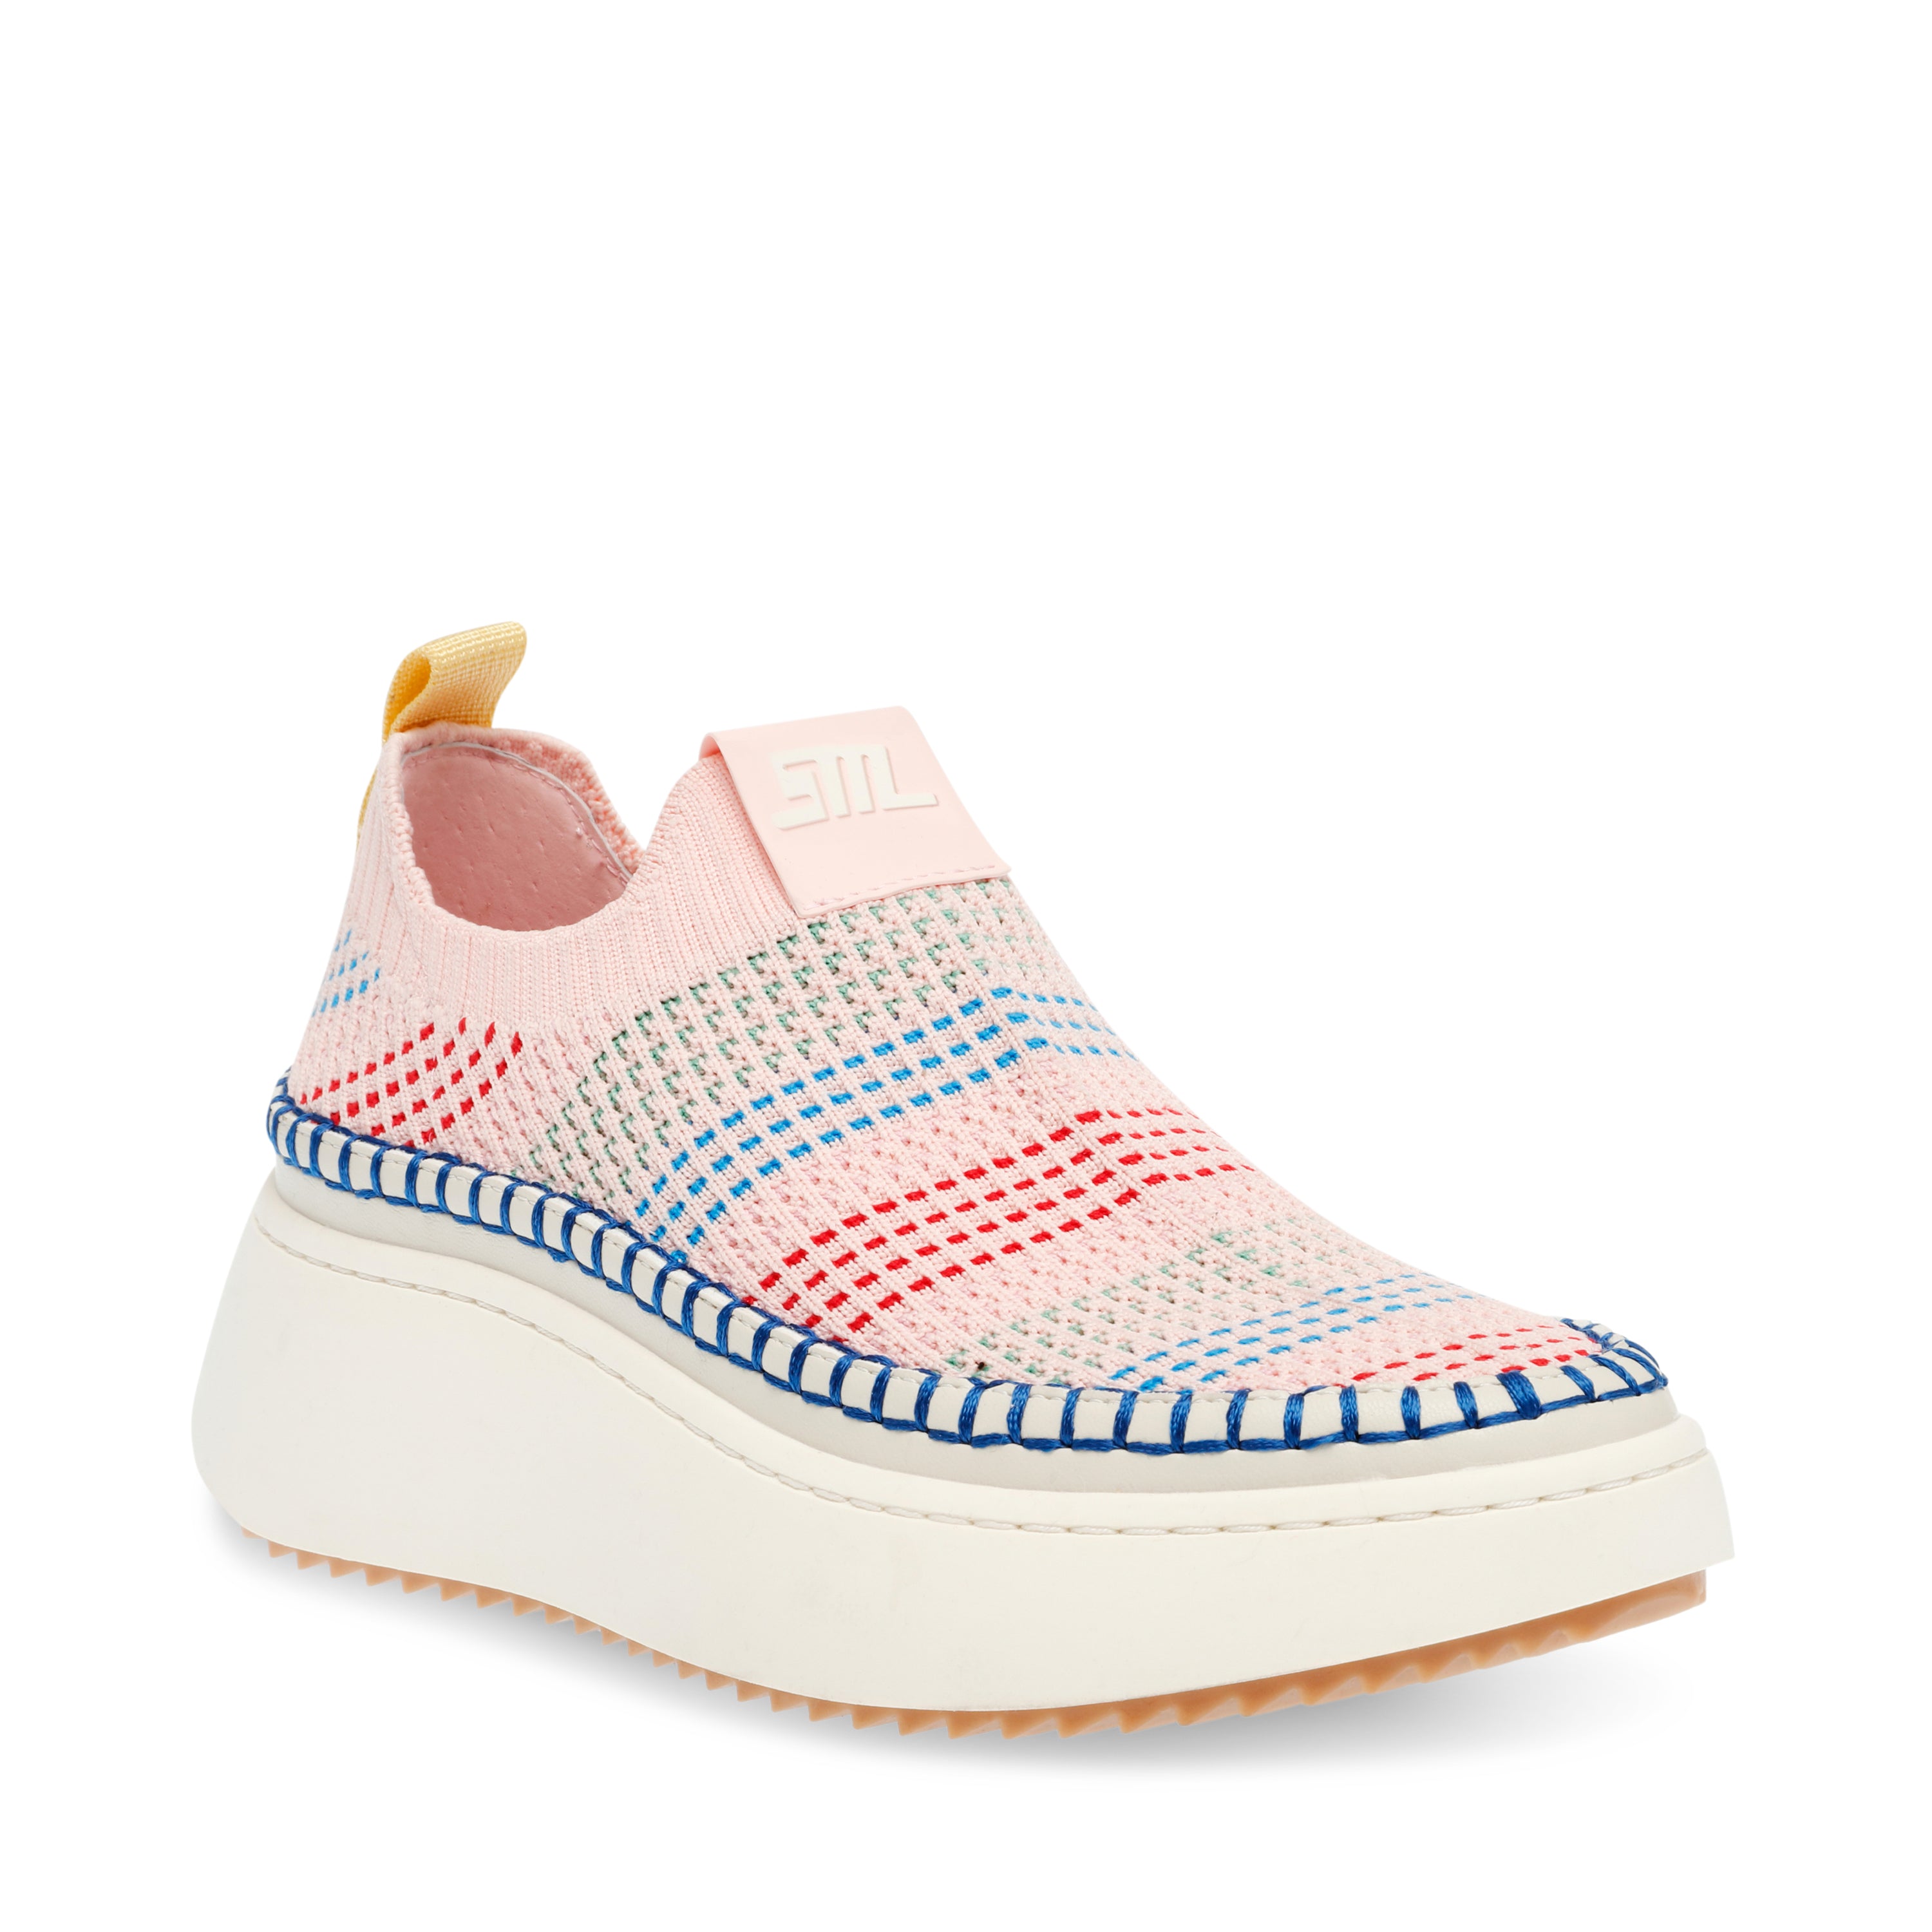 DOUBLESHOT PASTEL MULTI SNEAKERS- Hover Image